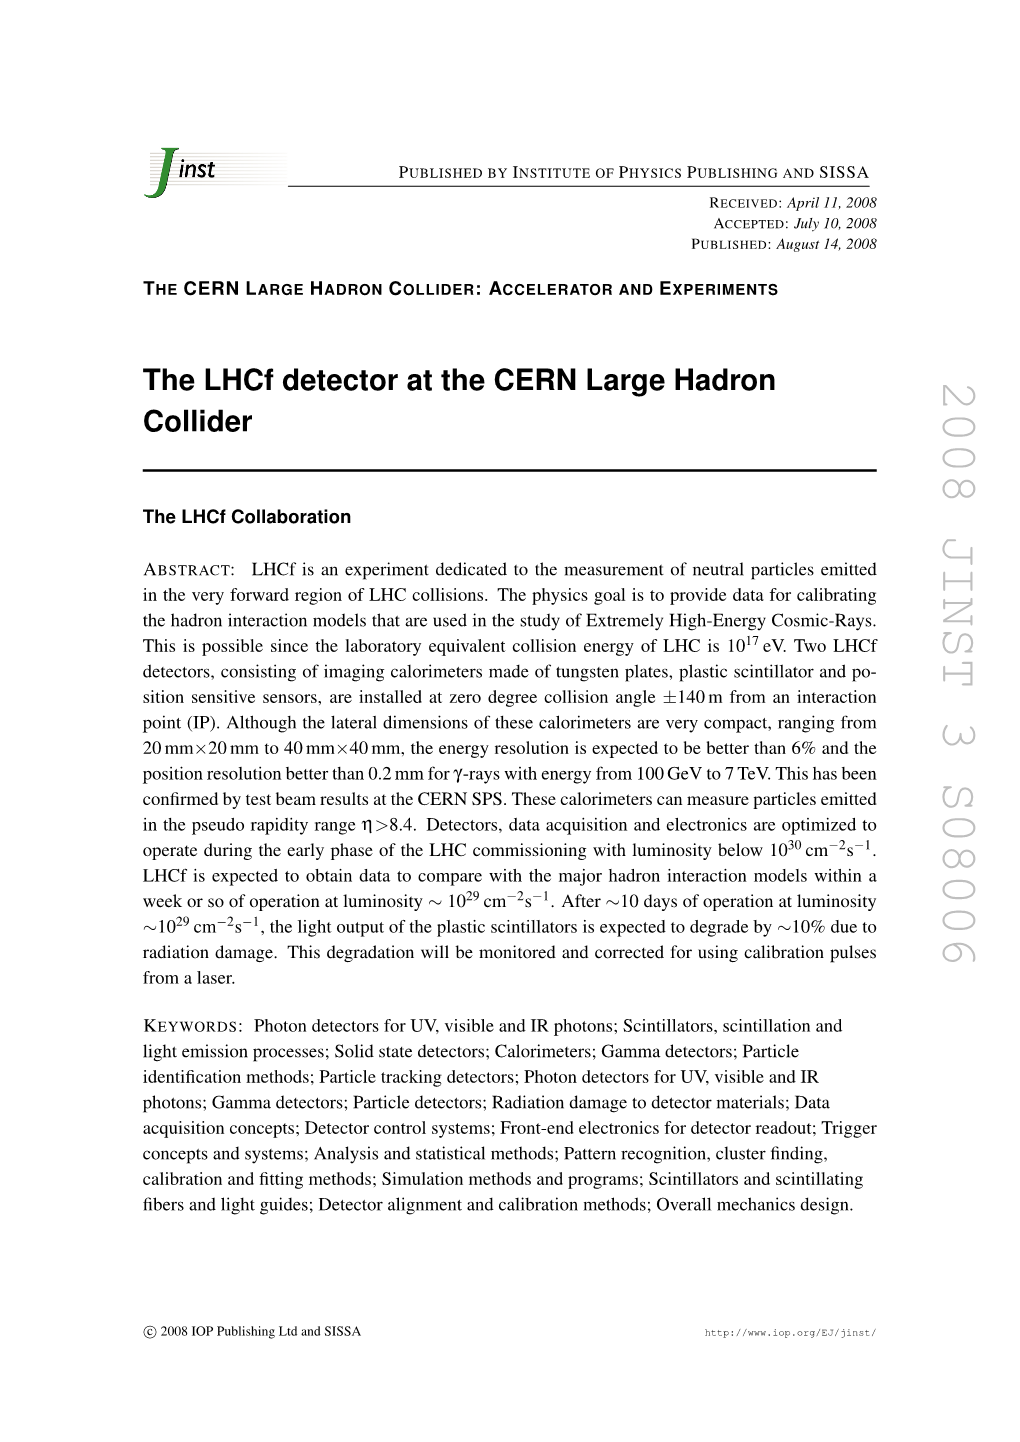 The Lhcf Detector at the CERN Large Hadron Collider